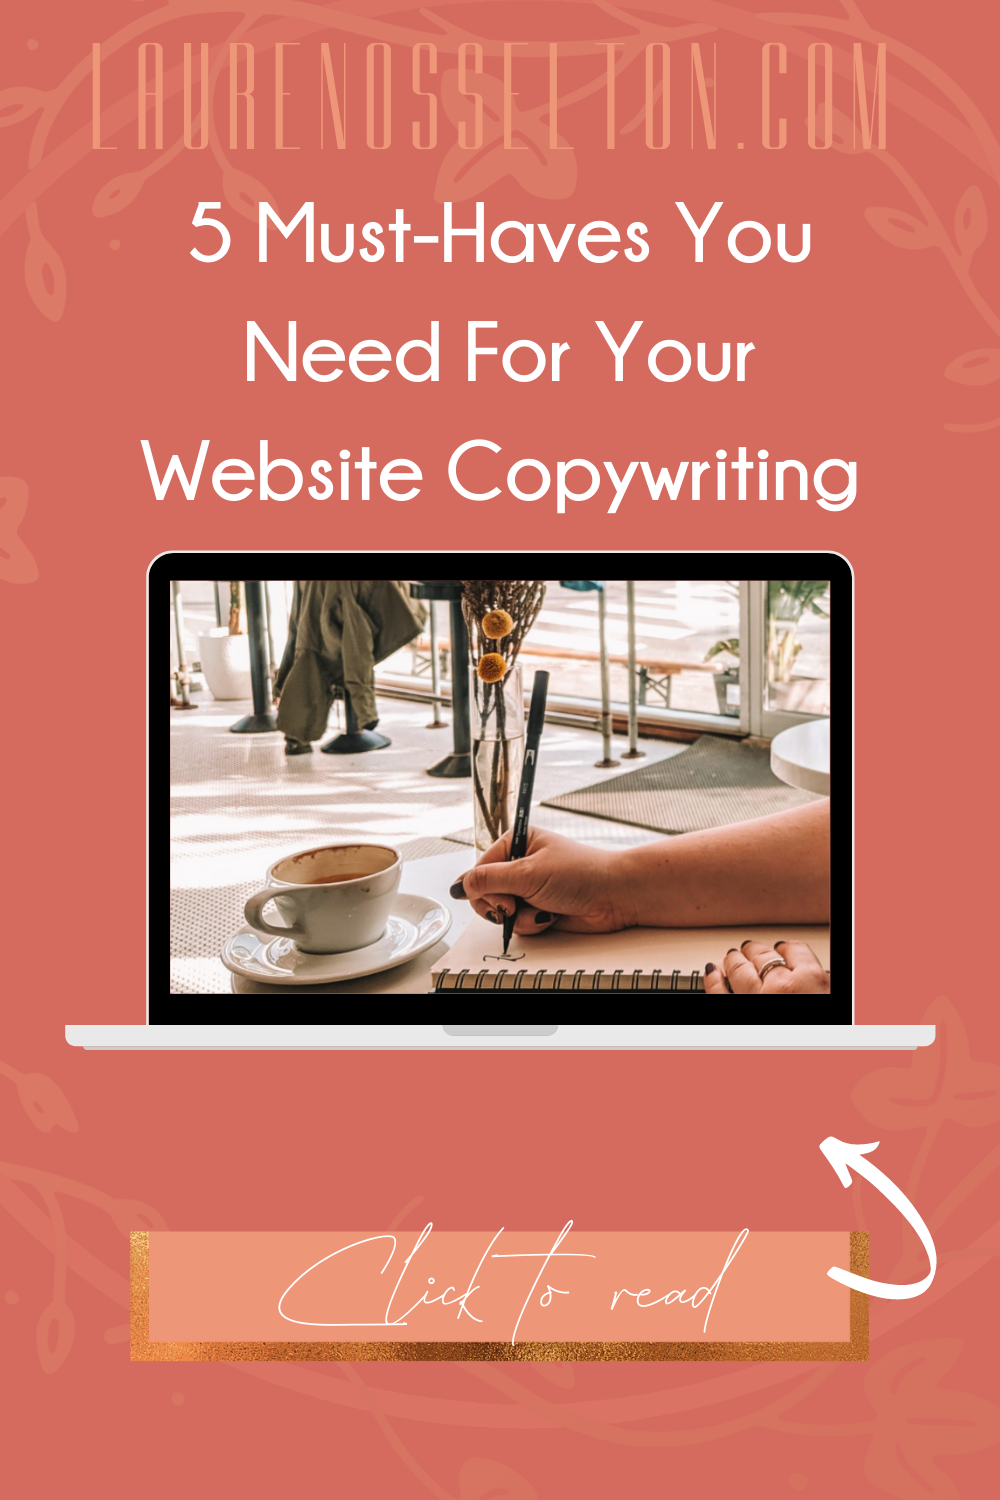 The 5 Website Copy Must-Haves | Lauren Osselton. How to write your website copy? Click to read my best website copywriting tips with the 5 things your website needs to attract your ideal clients, make an impact with your copy and create a high converting website! From SEO tips to copywriting tips, this article will help you get started on your website copy right now!